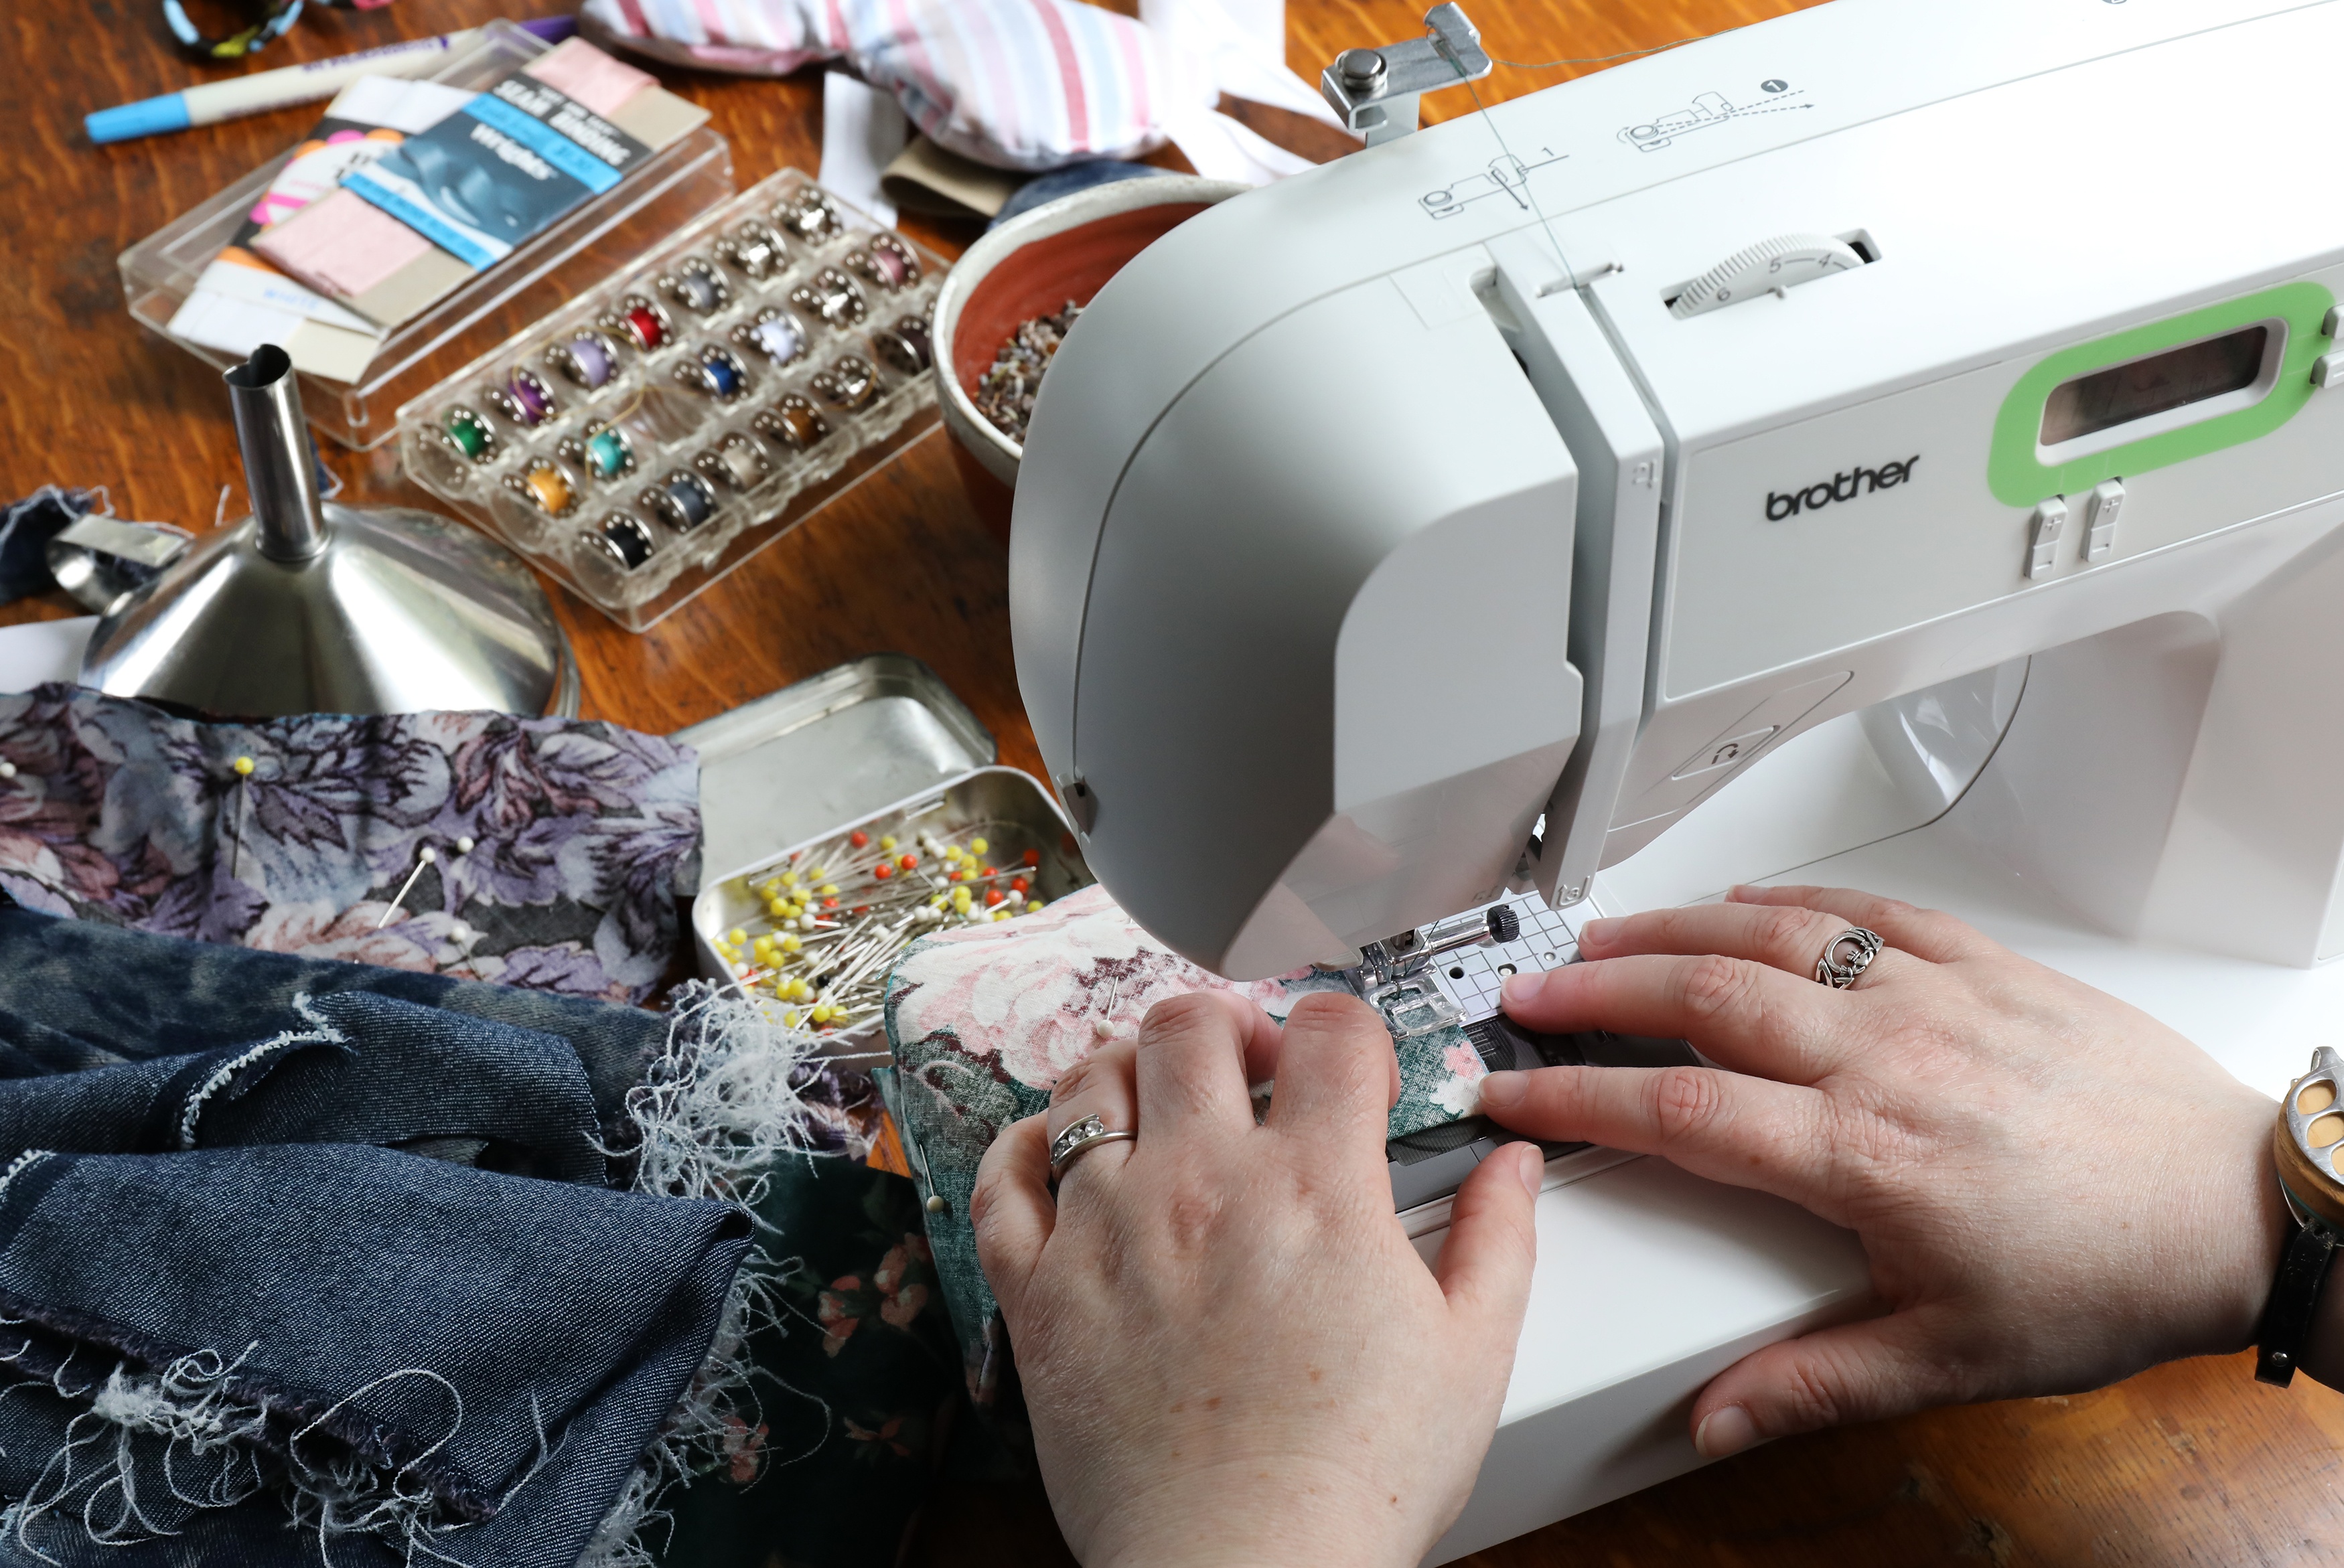 hands on sewing machine sewing fabric to make buckwheat lavender eye pillows